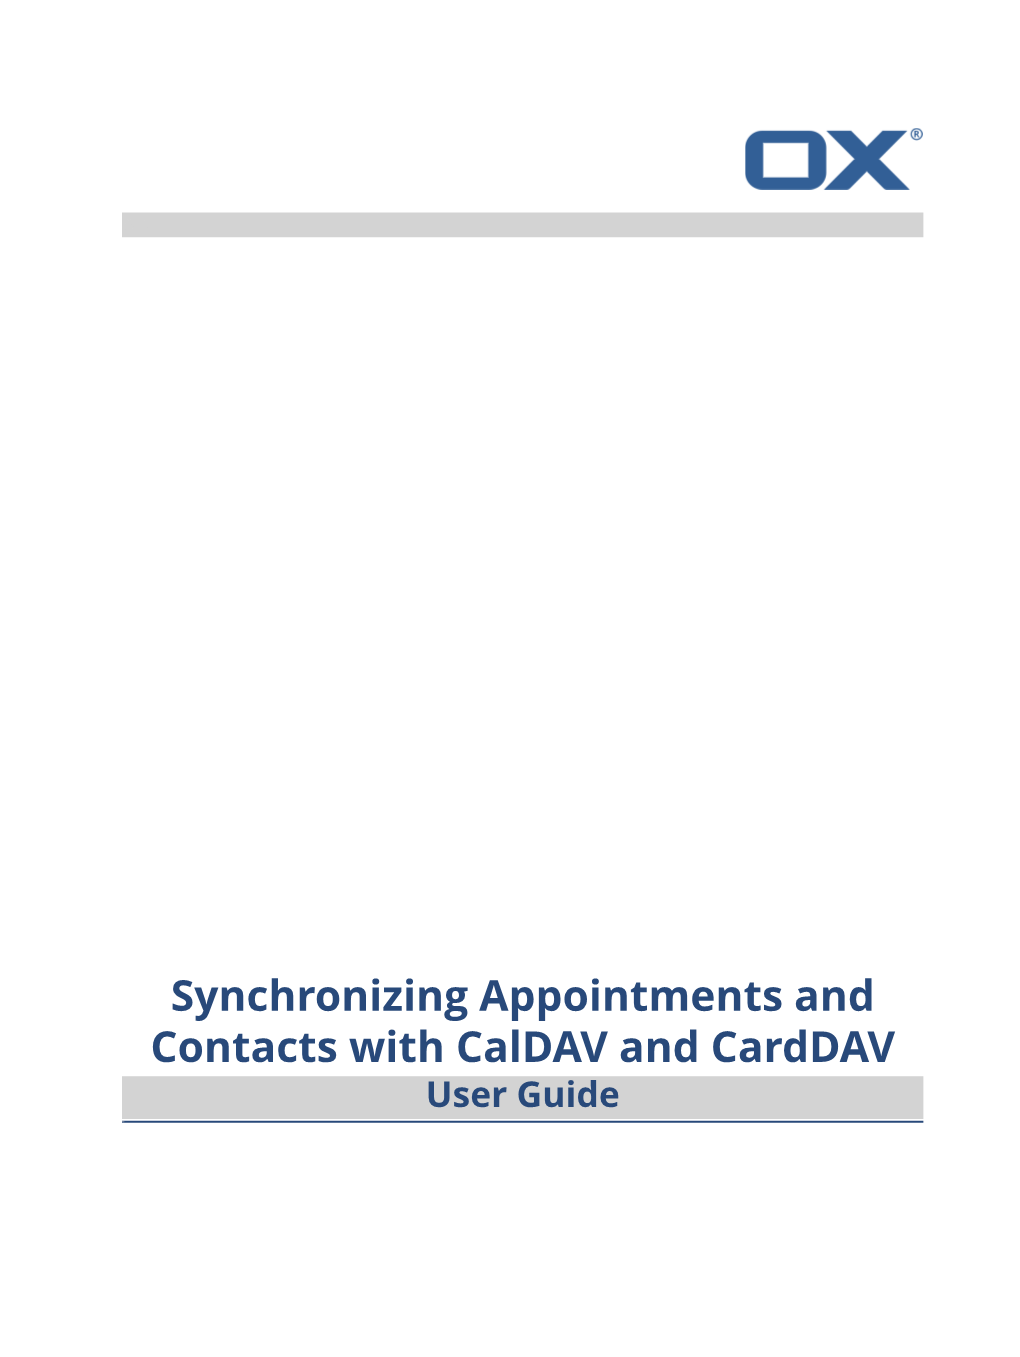 Synchronizing Appointments and Contacts with Caldav and Carddav User Guide